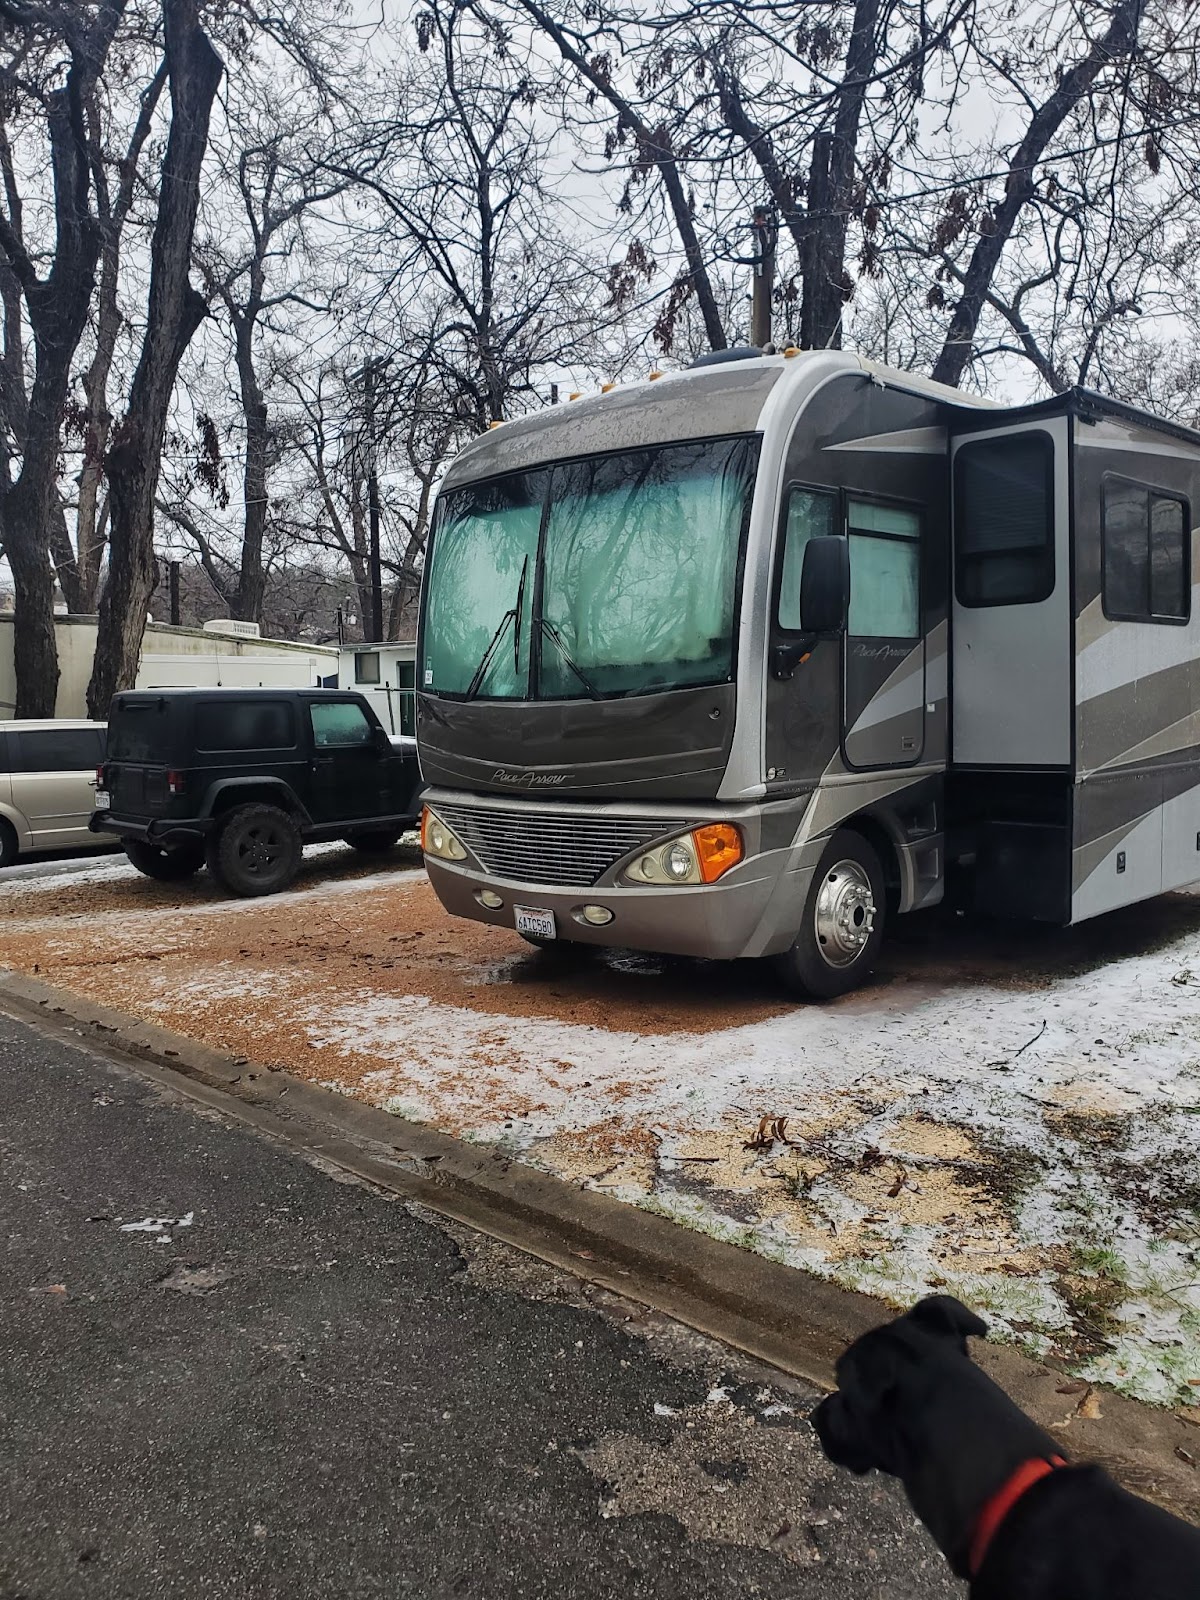 A large RV parked in a snowy parking lot, featuring a large black dog in the bottom right corner.